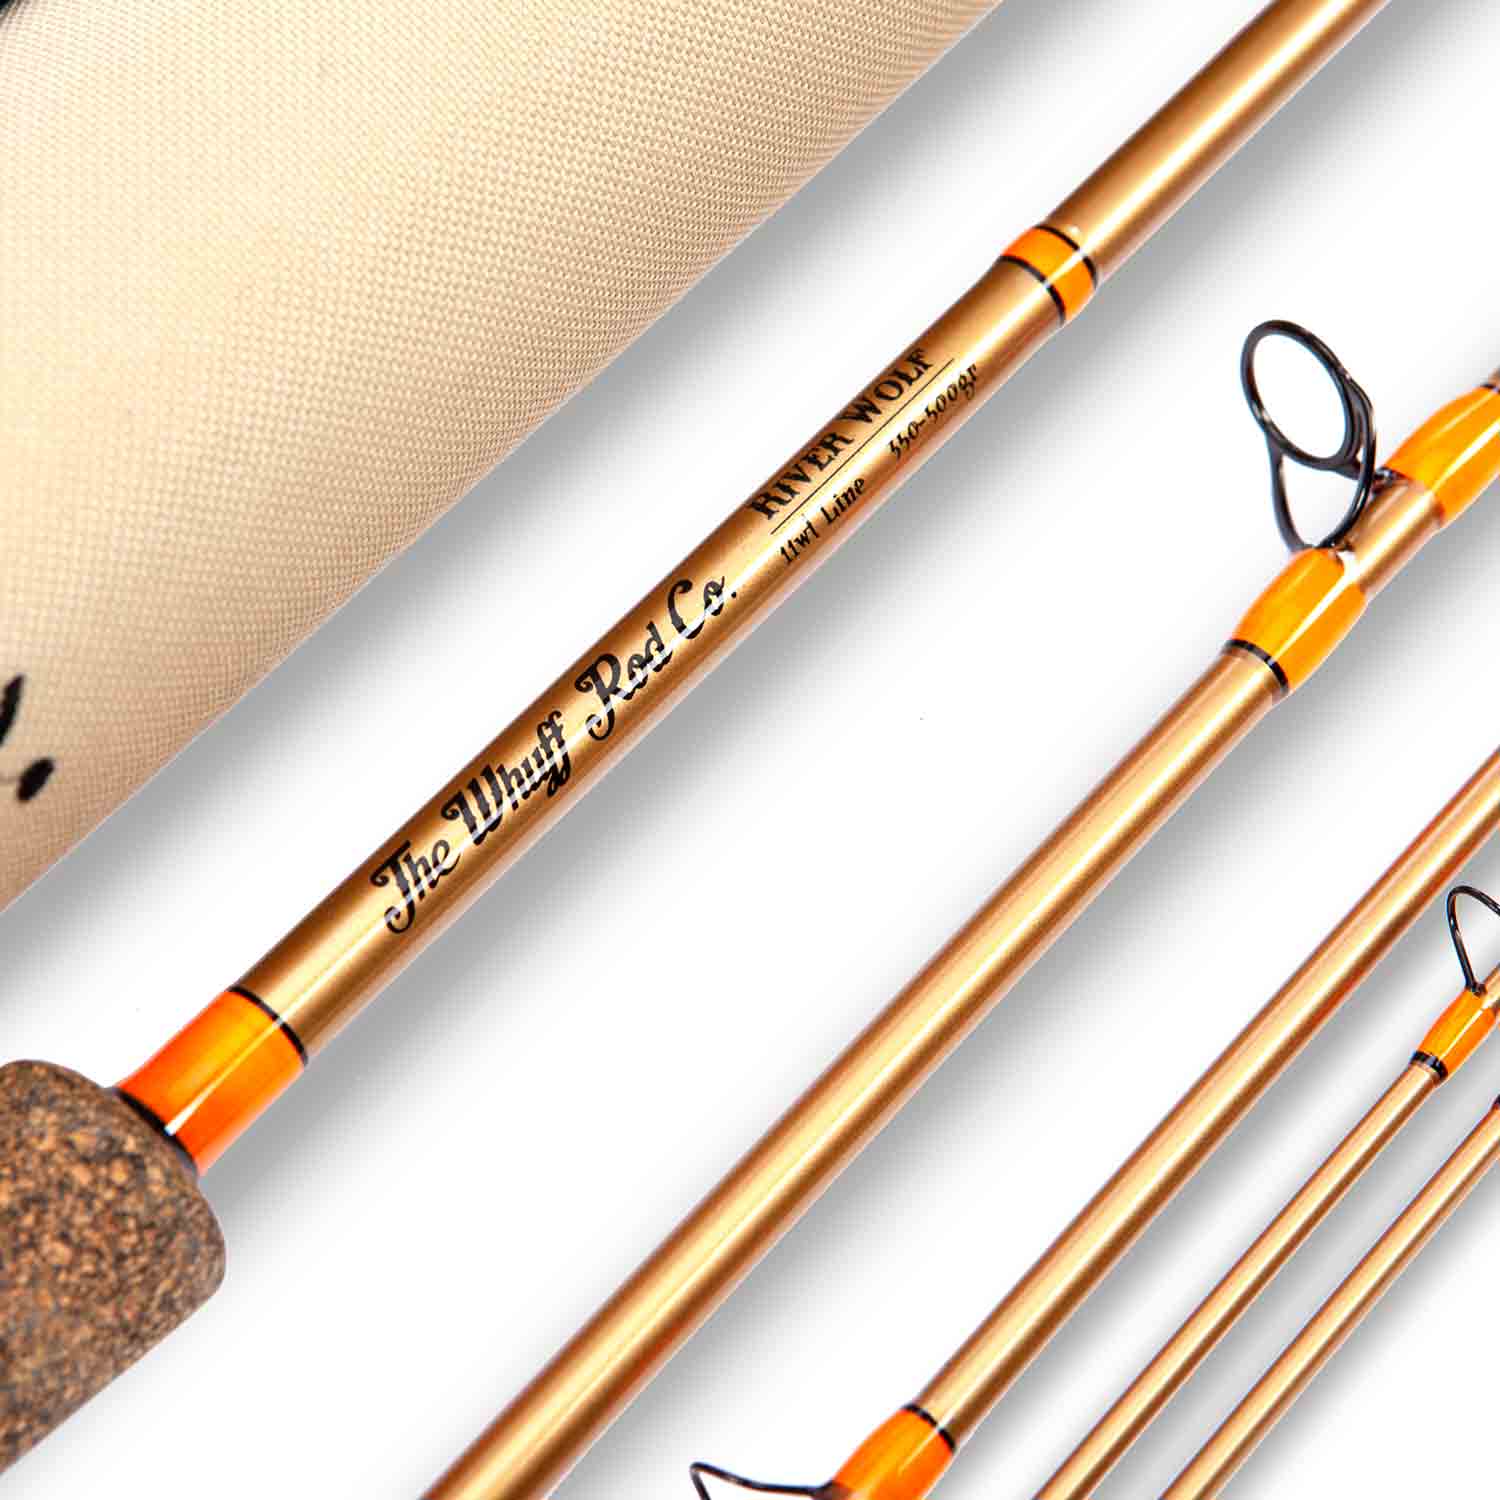 Whuff Rod Co River Wolf 11wt Fly Rods